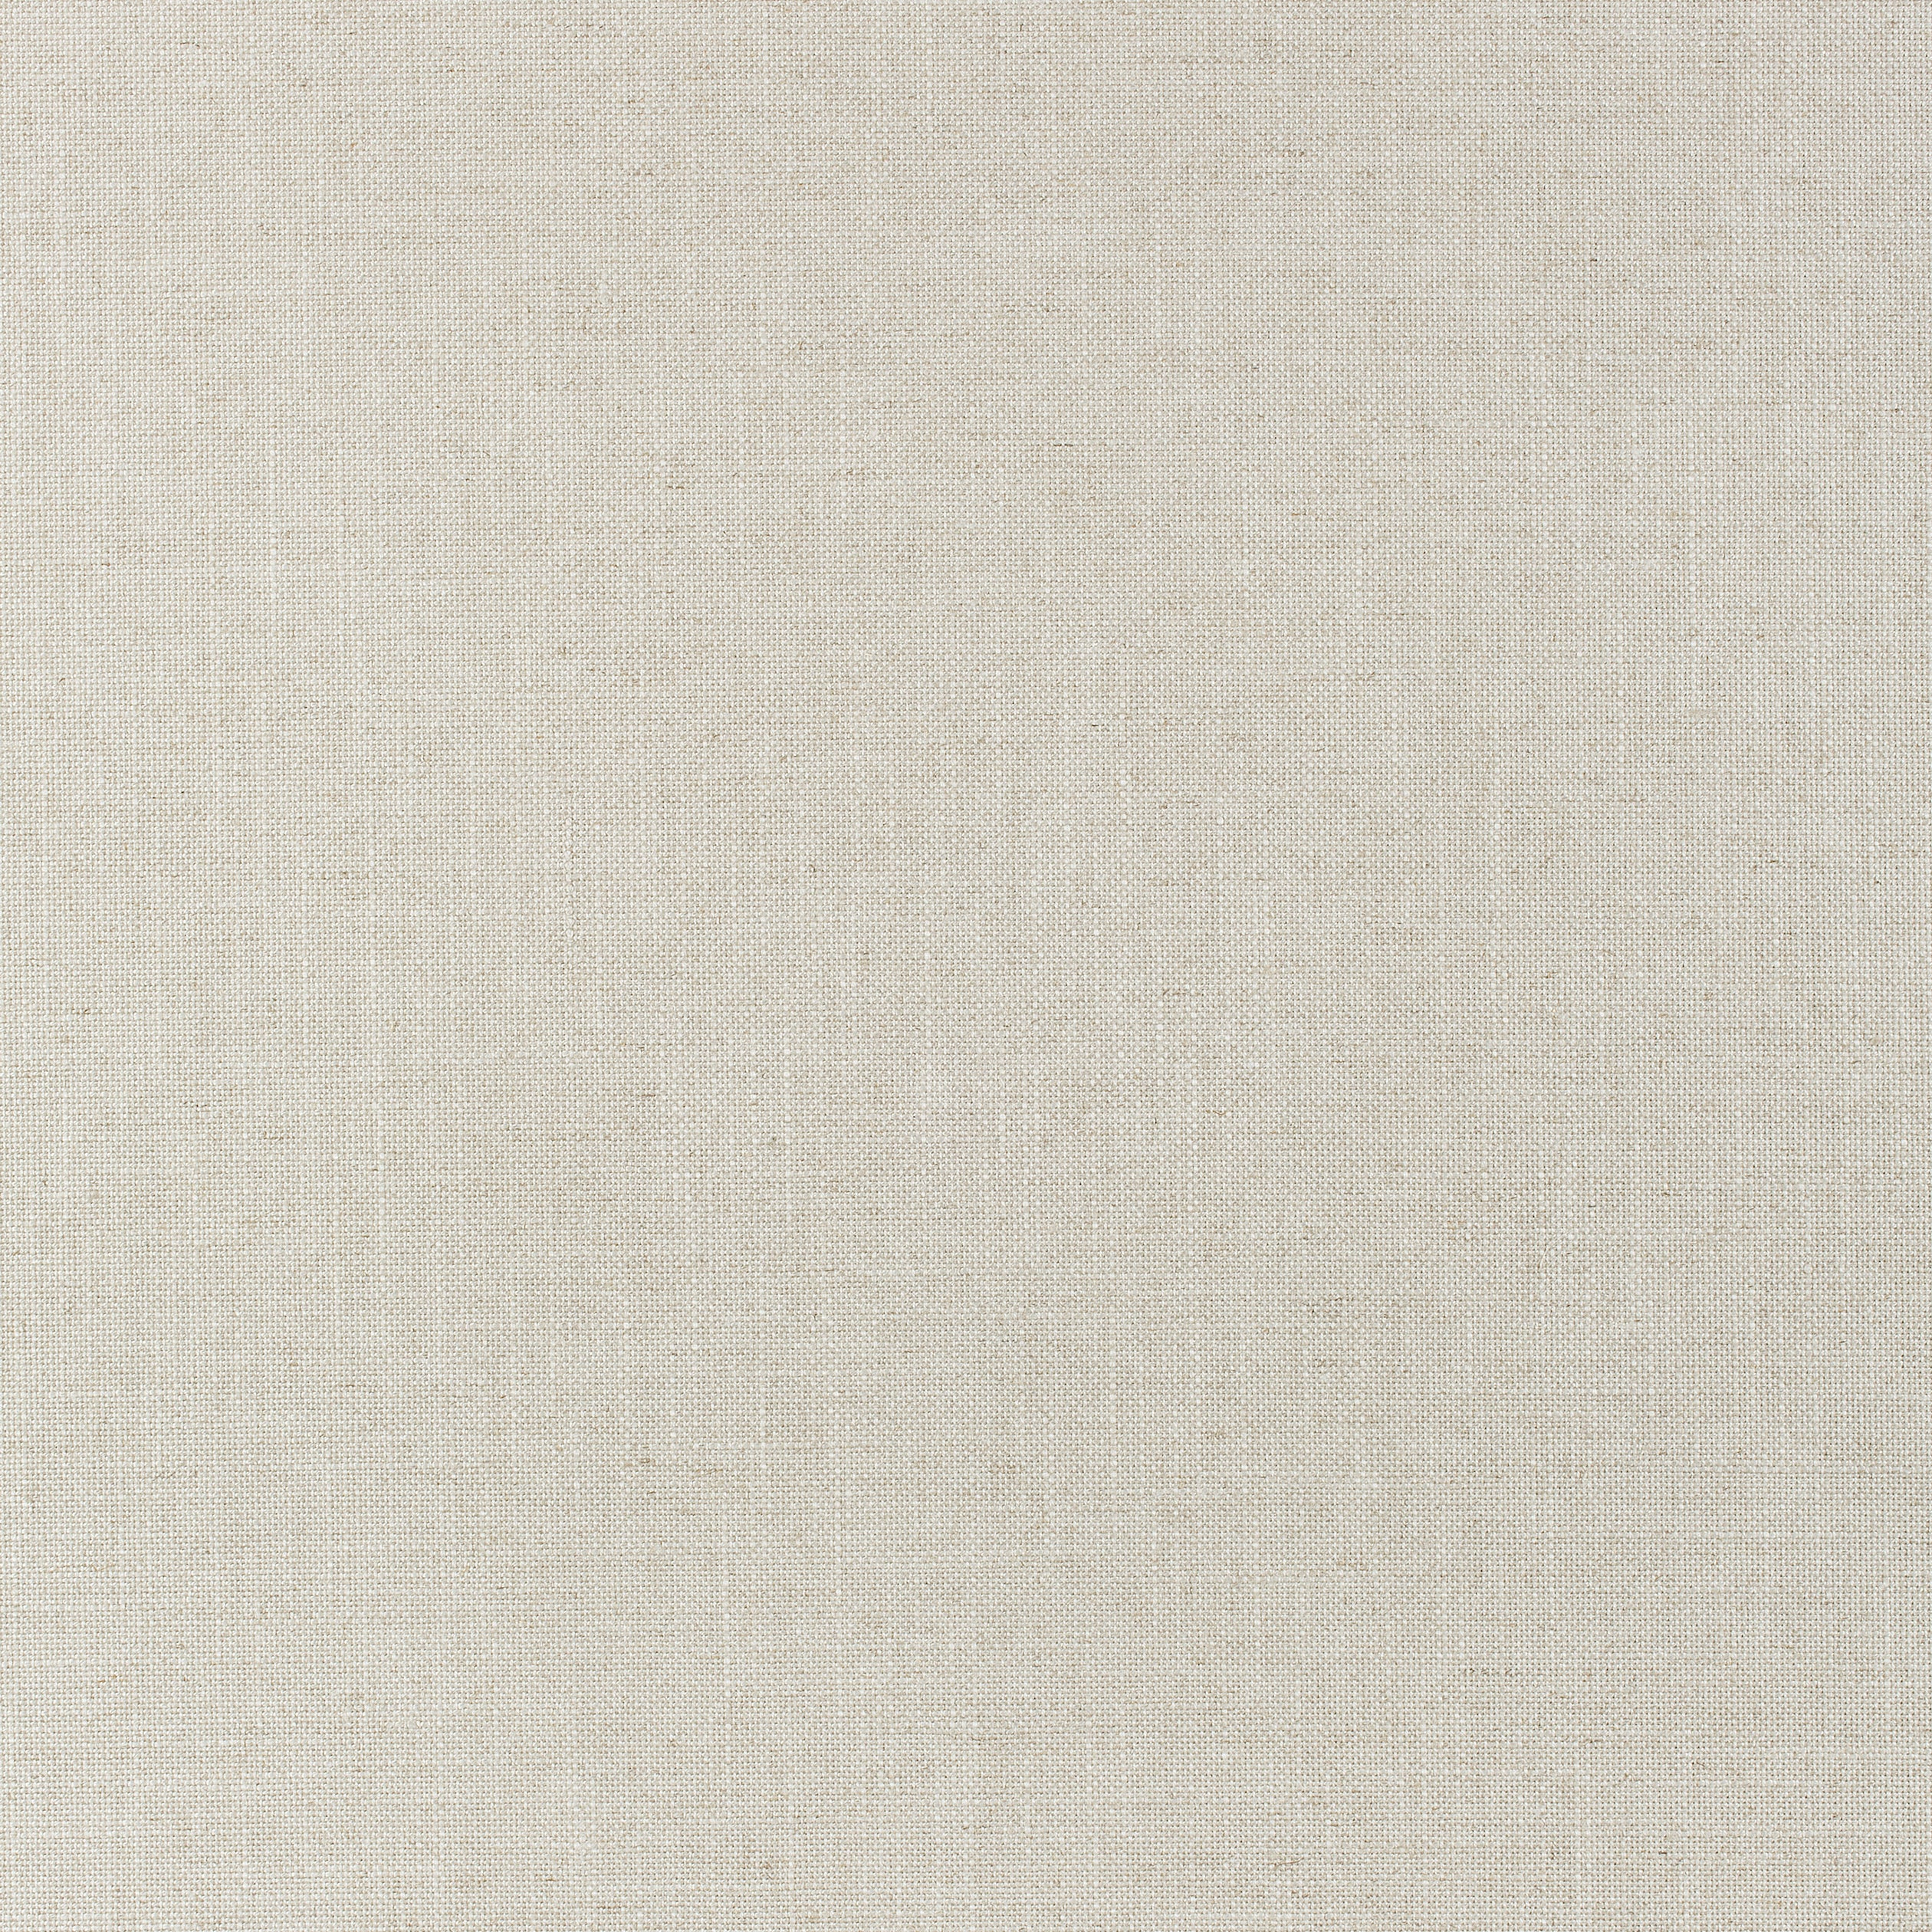 Lira fabric in flax color - pattern number W80463 - by Thibaut in the Mosaic collection